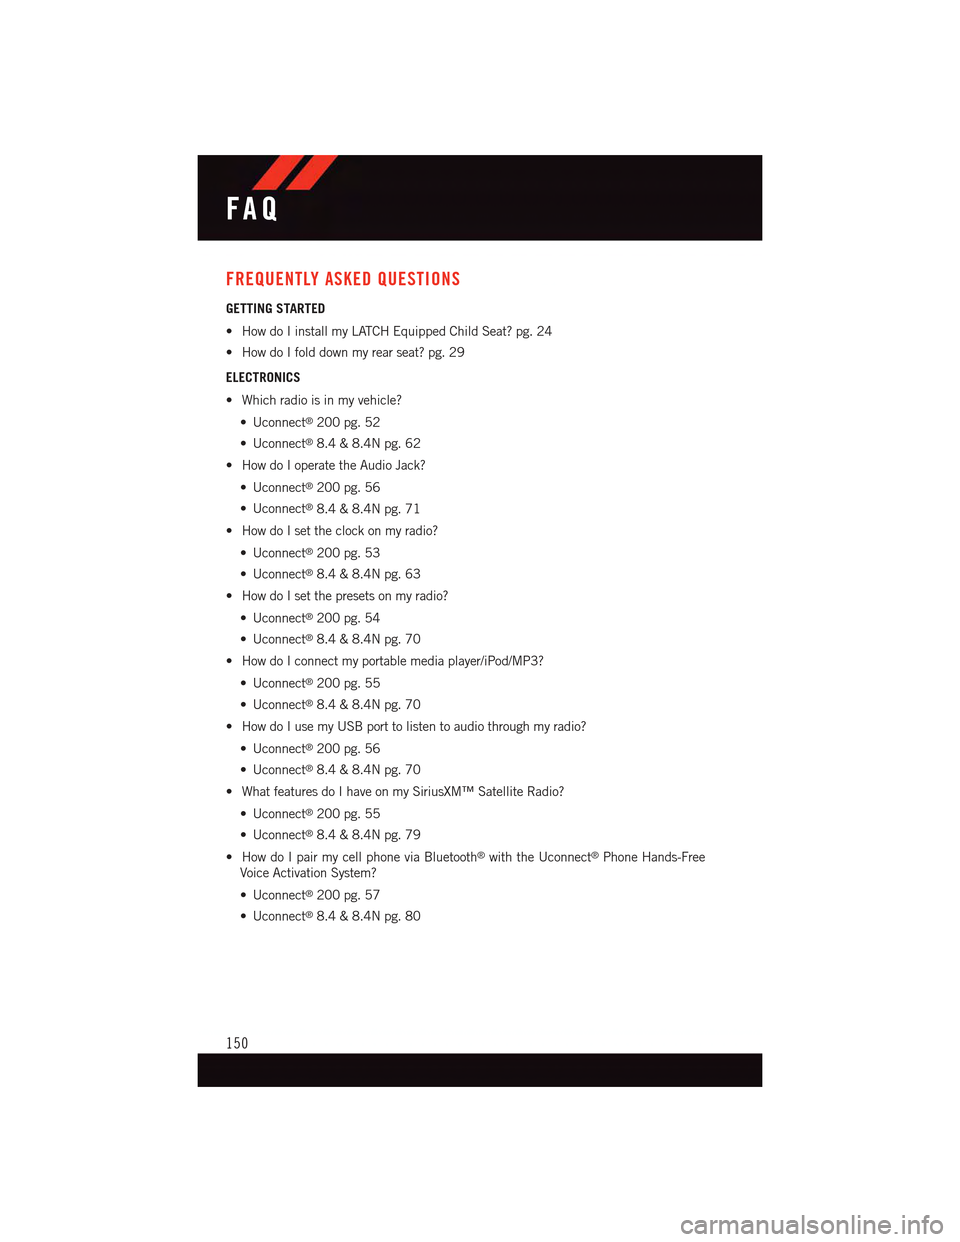 DODGE DART 2015 PF / 1.G User Guide FREQUENTLY ASKED QUESTIONS
GETTING STARTED
•HowdoIinstallmyLATCHEquippedChildSeat?pg.24
•HowdoIfolddownmyrearseat?pg.29
ELECTRONICS
•Whichradioisinmyvehicle?
•Uconnect®200 pg. 52
•Uconnect�